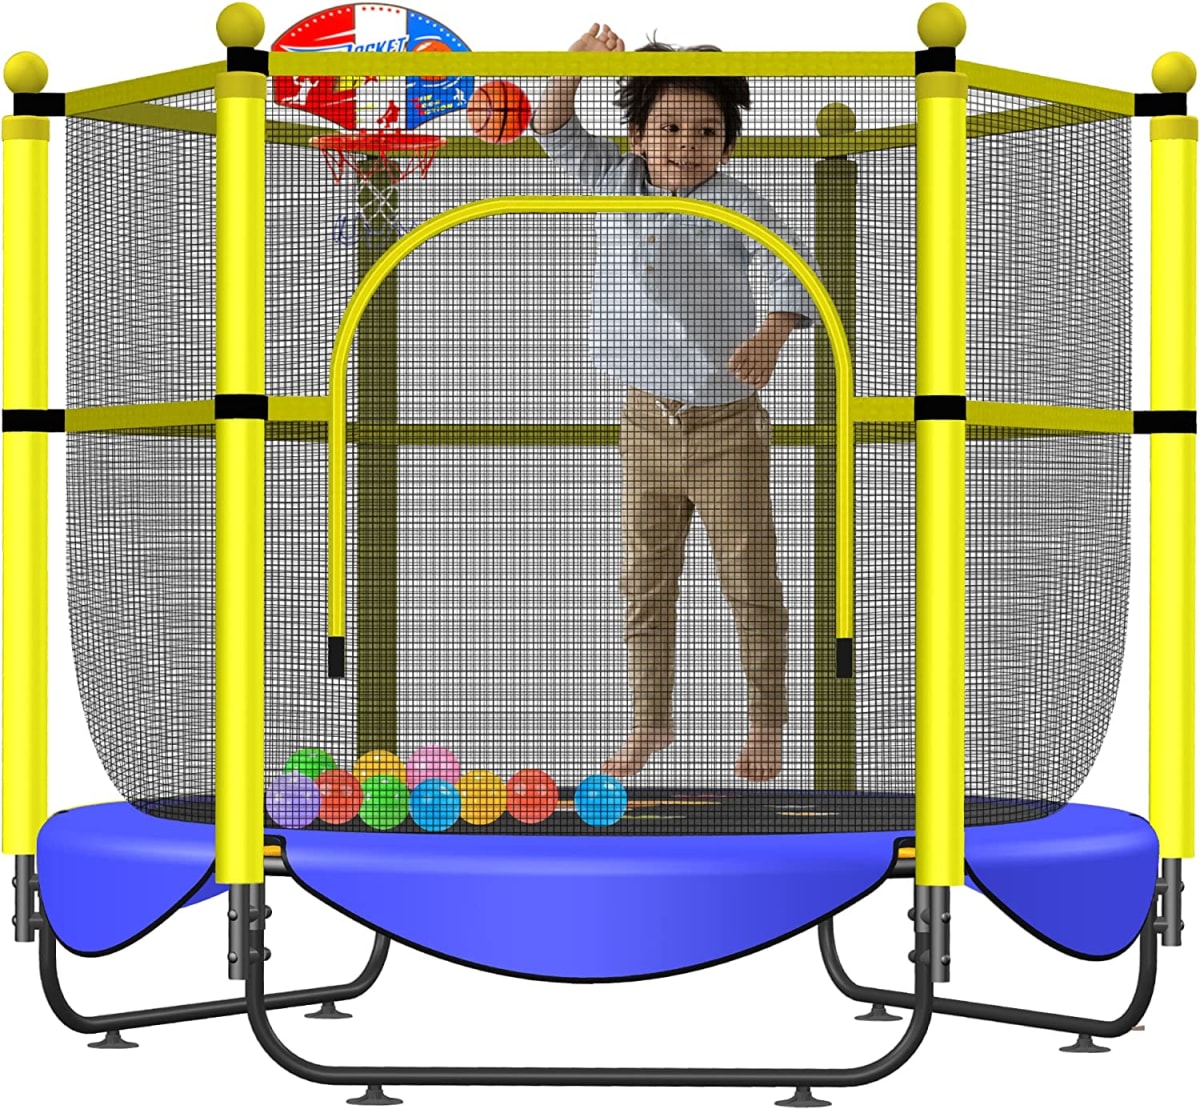 Asee'm 60" Trampoline